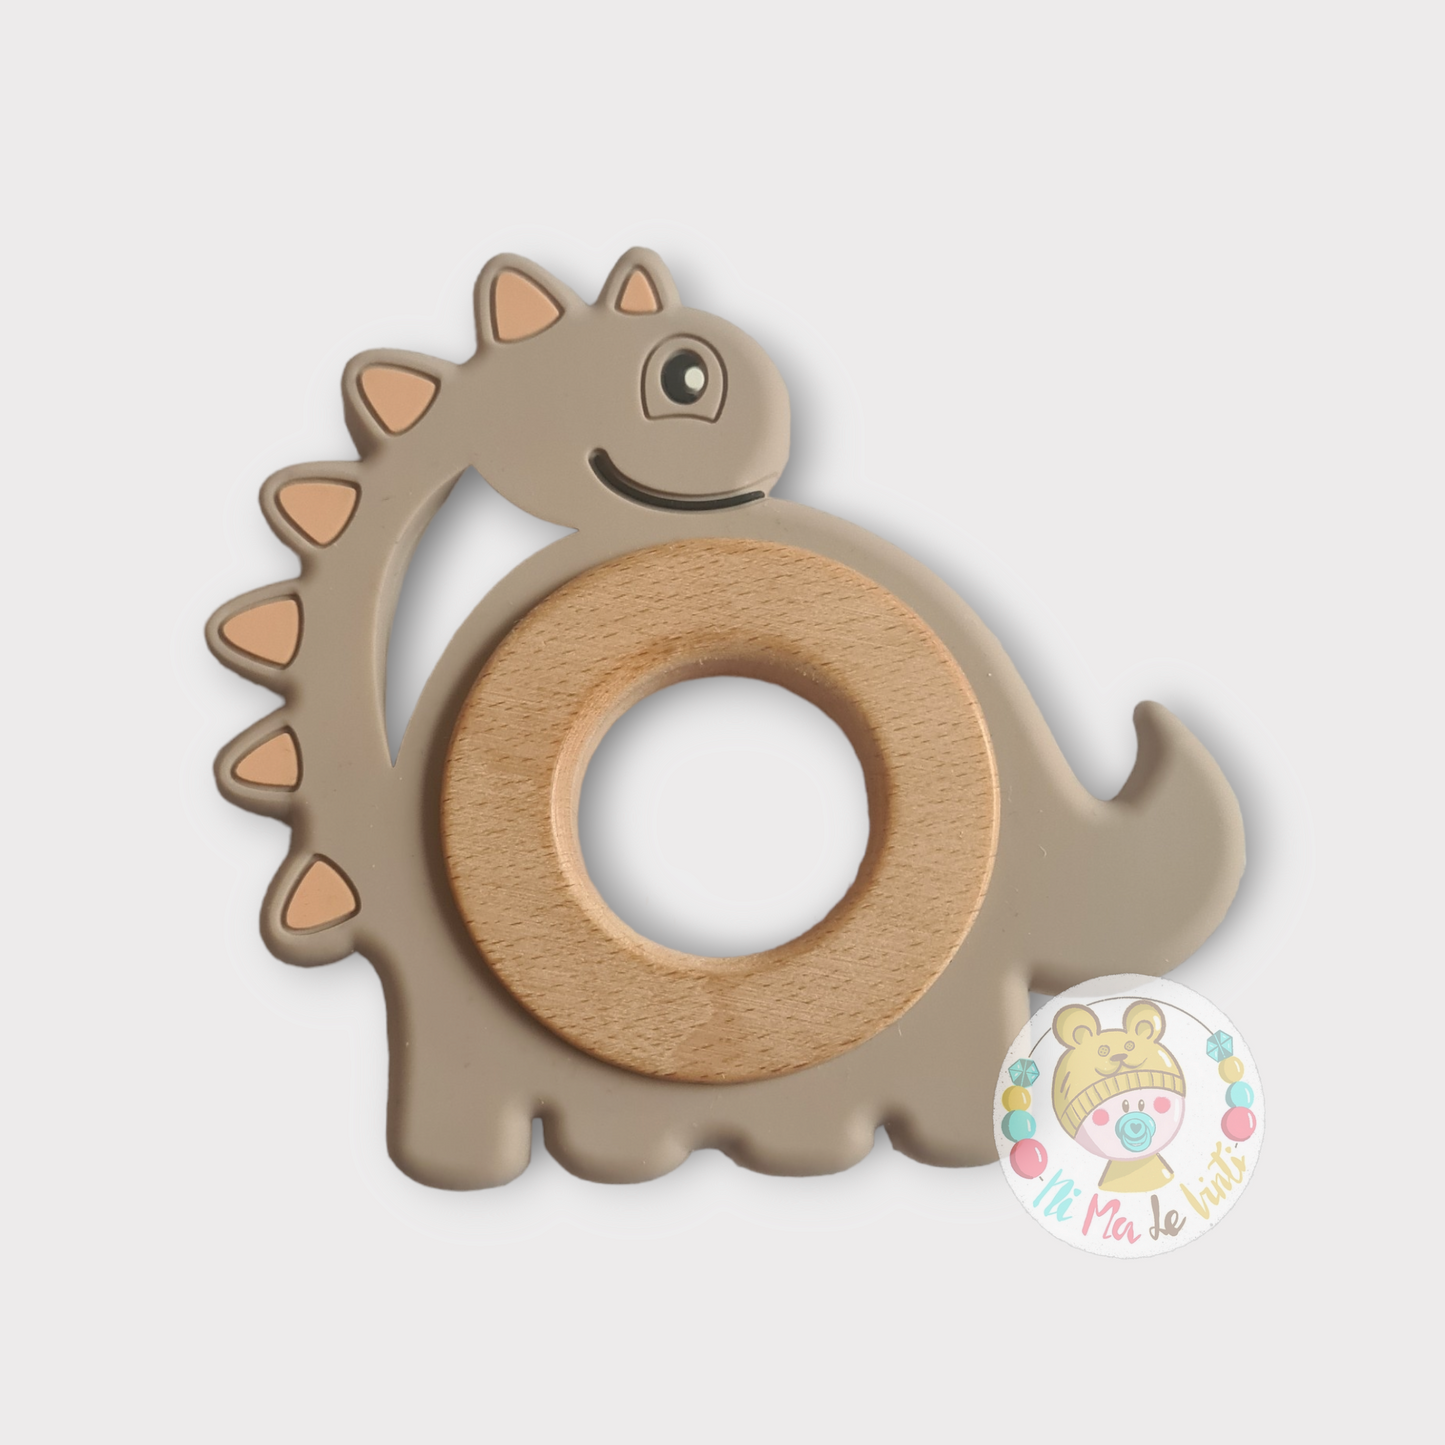 Dinosaur Wooden/Silicone Teether